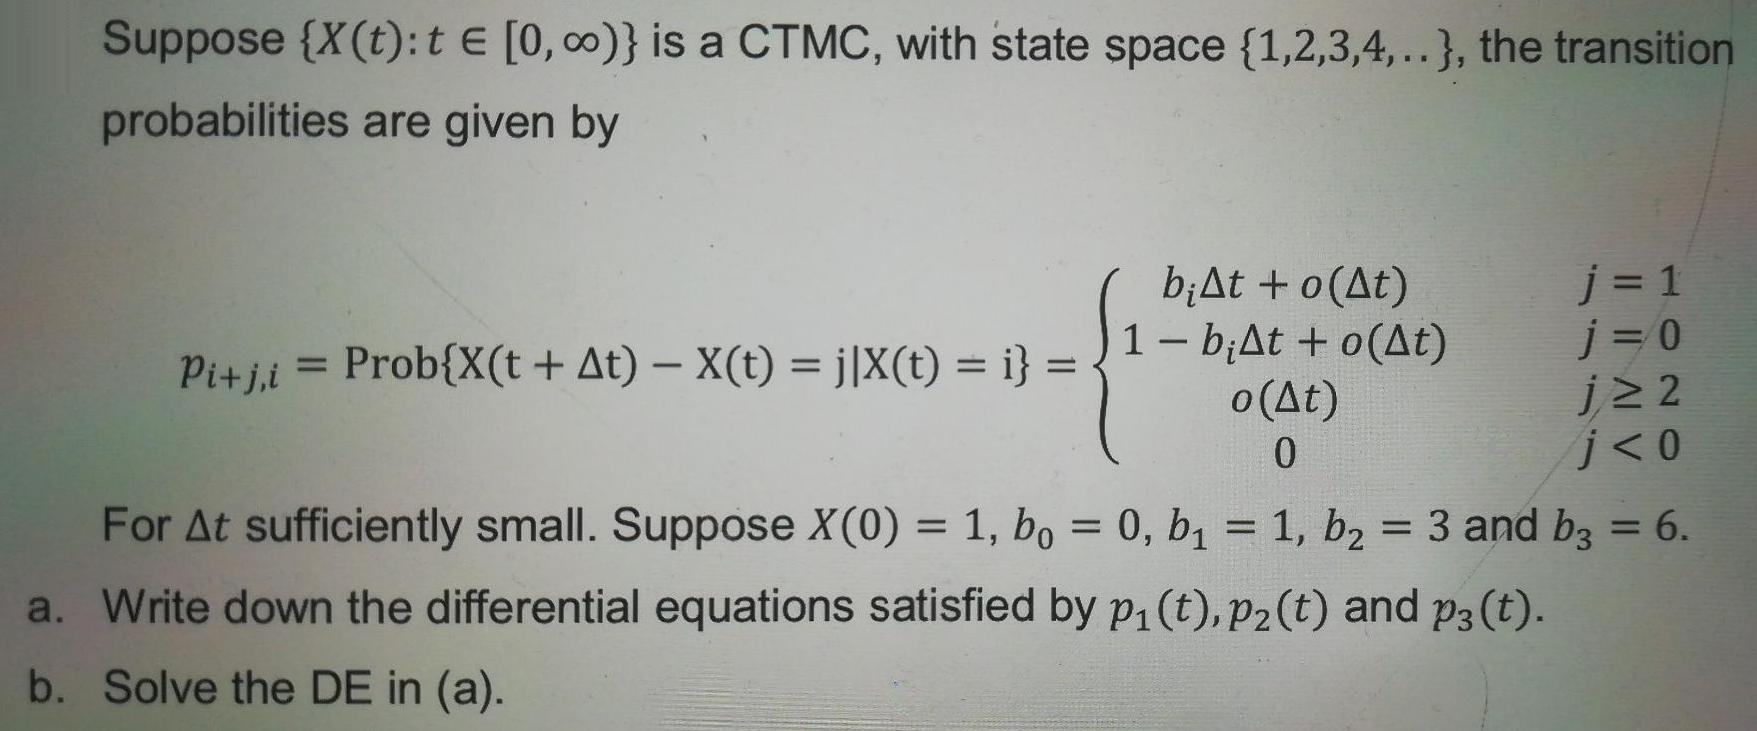 Suppose {X(t): t E [0, o)} is a CTMC, with state space {1,2,3,4,..}, the transition probabilities are given